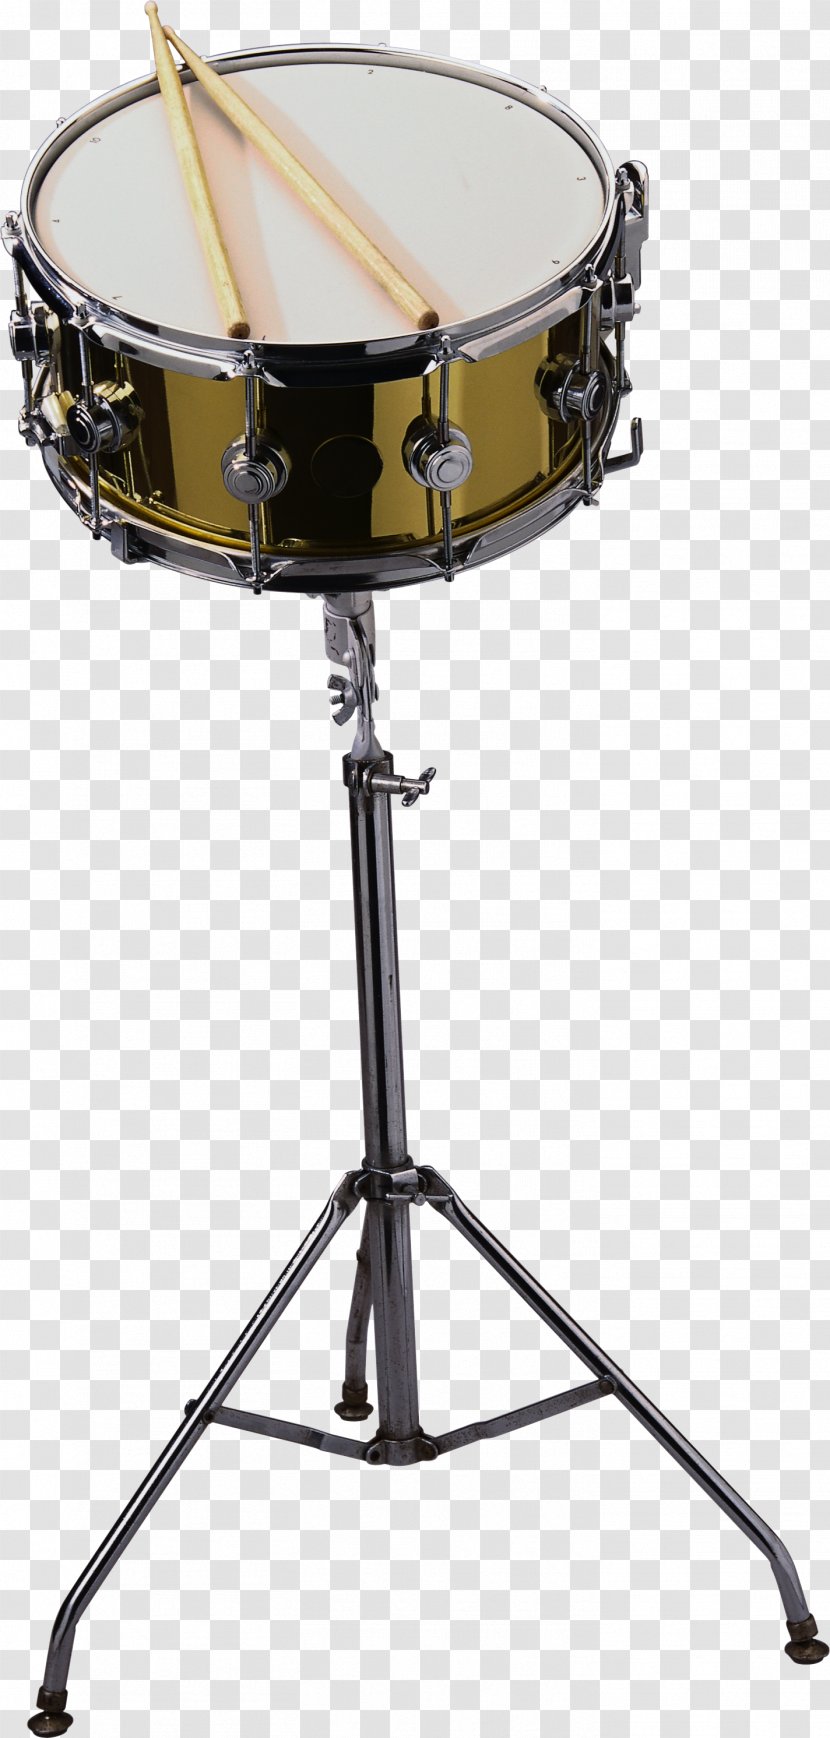 Tom-Toms Timbales Drum Stick Snare Drums Marching Percussion - Tree Transparent PNG